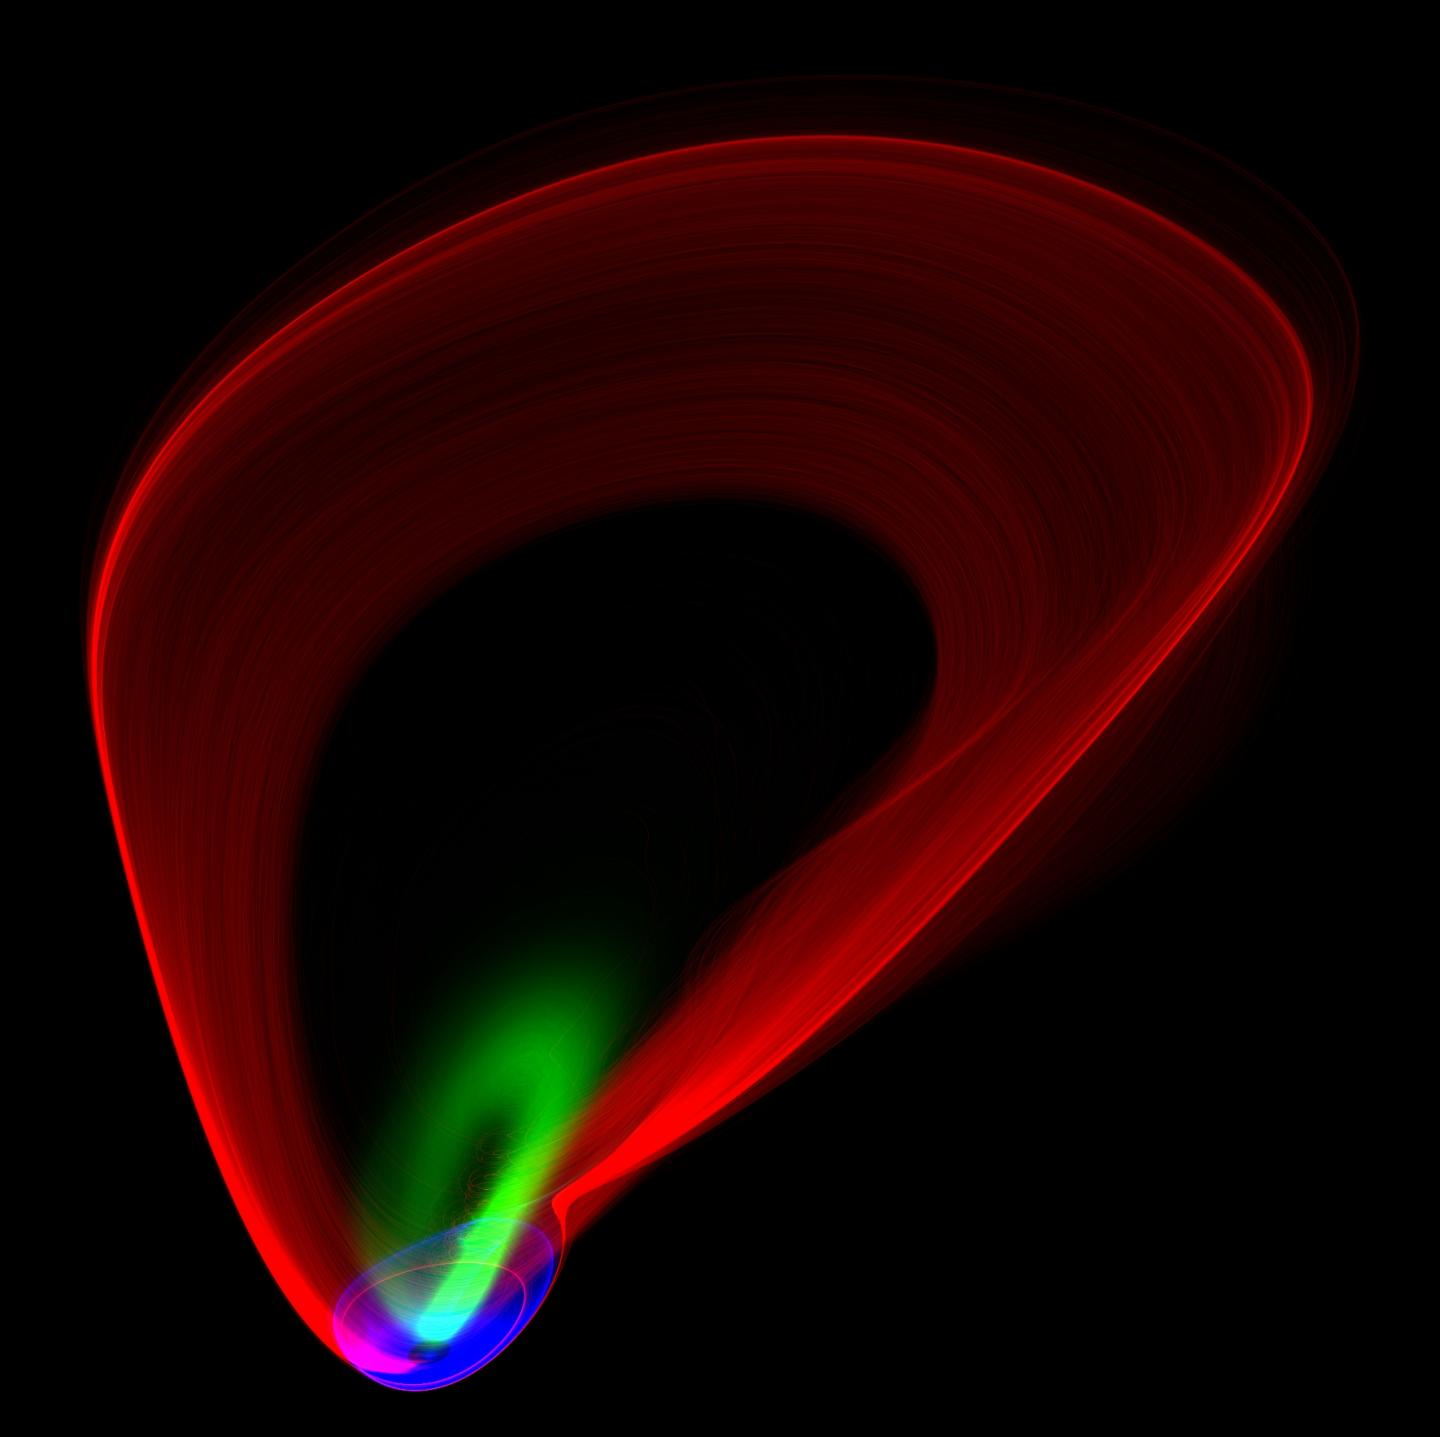 Image of a So-Called Chaotic Saddle